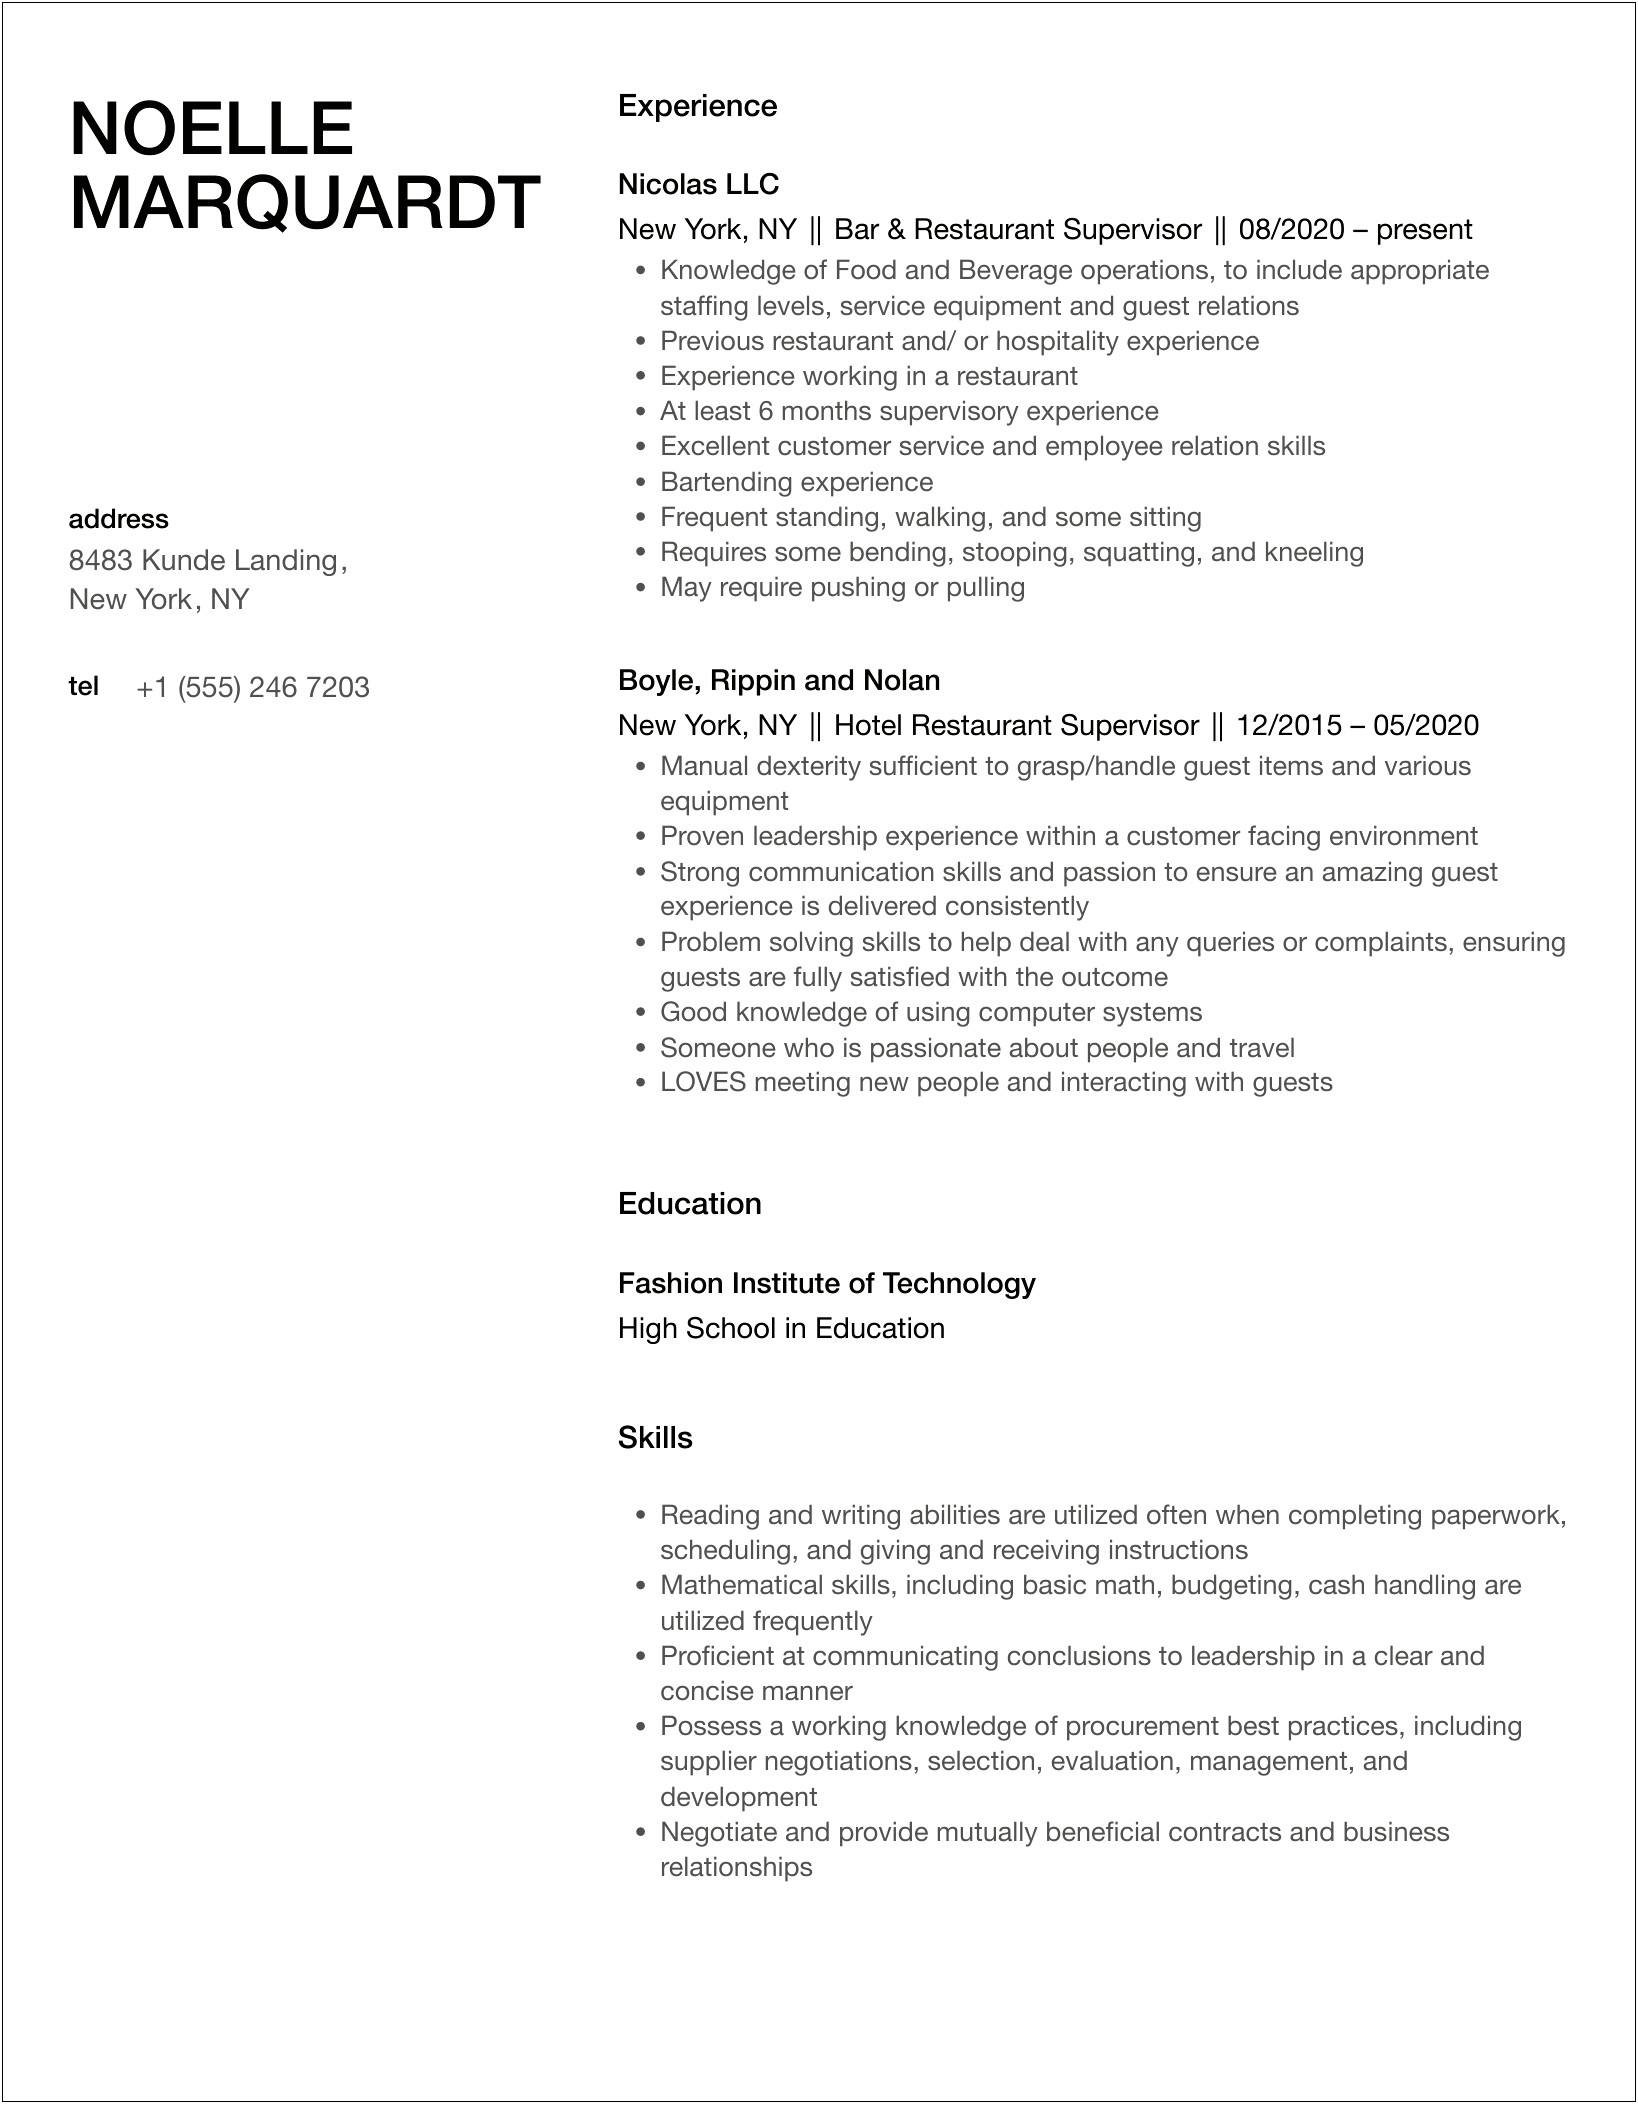 Resume With 6 Months Experience In Restaurant Industry